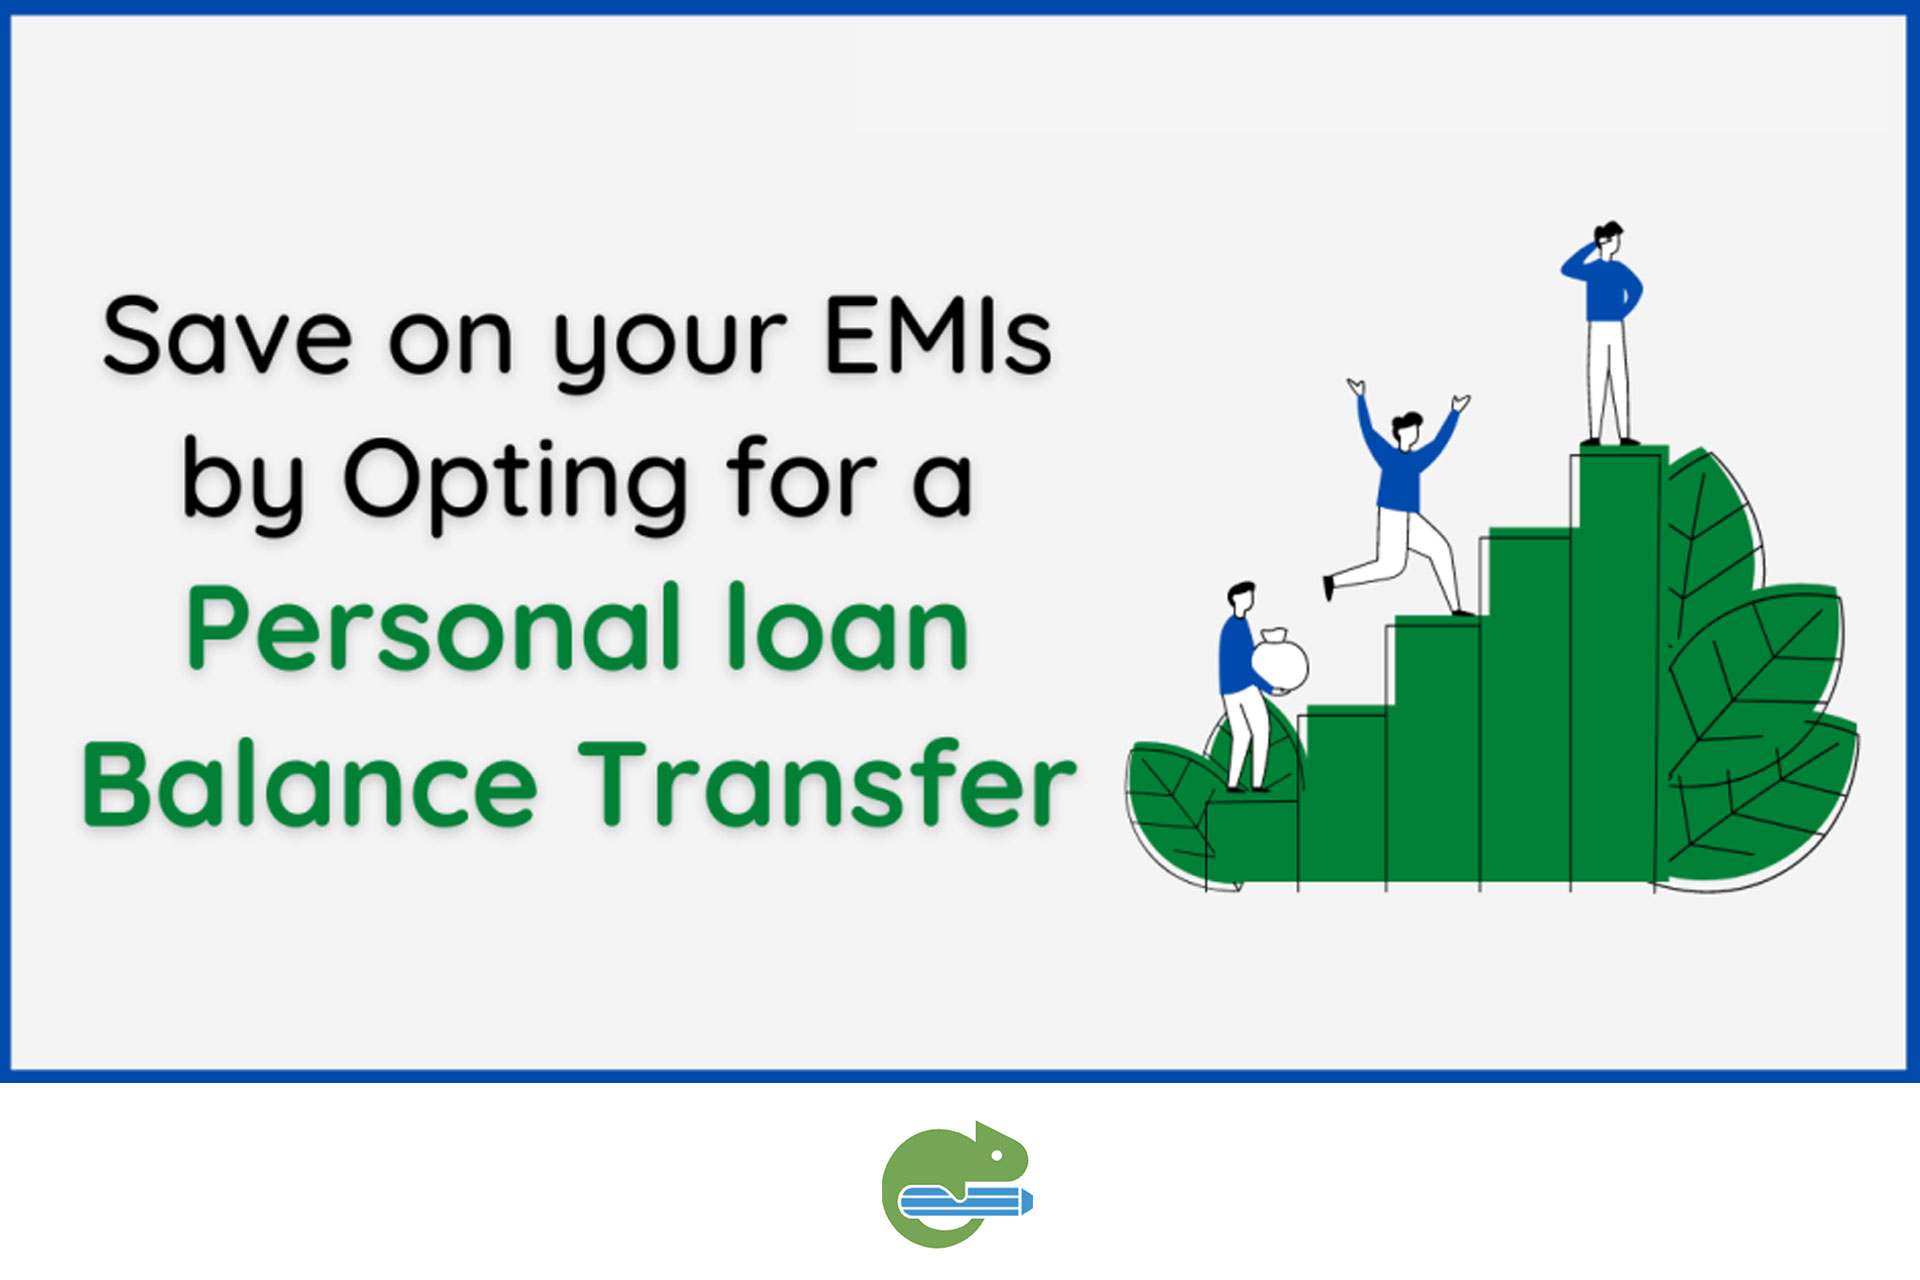 Save on your EMIs by Opting for a Personal loan Balance Transfer